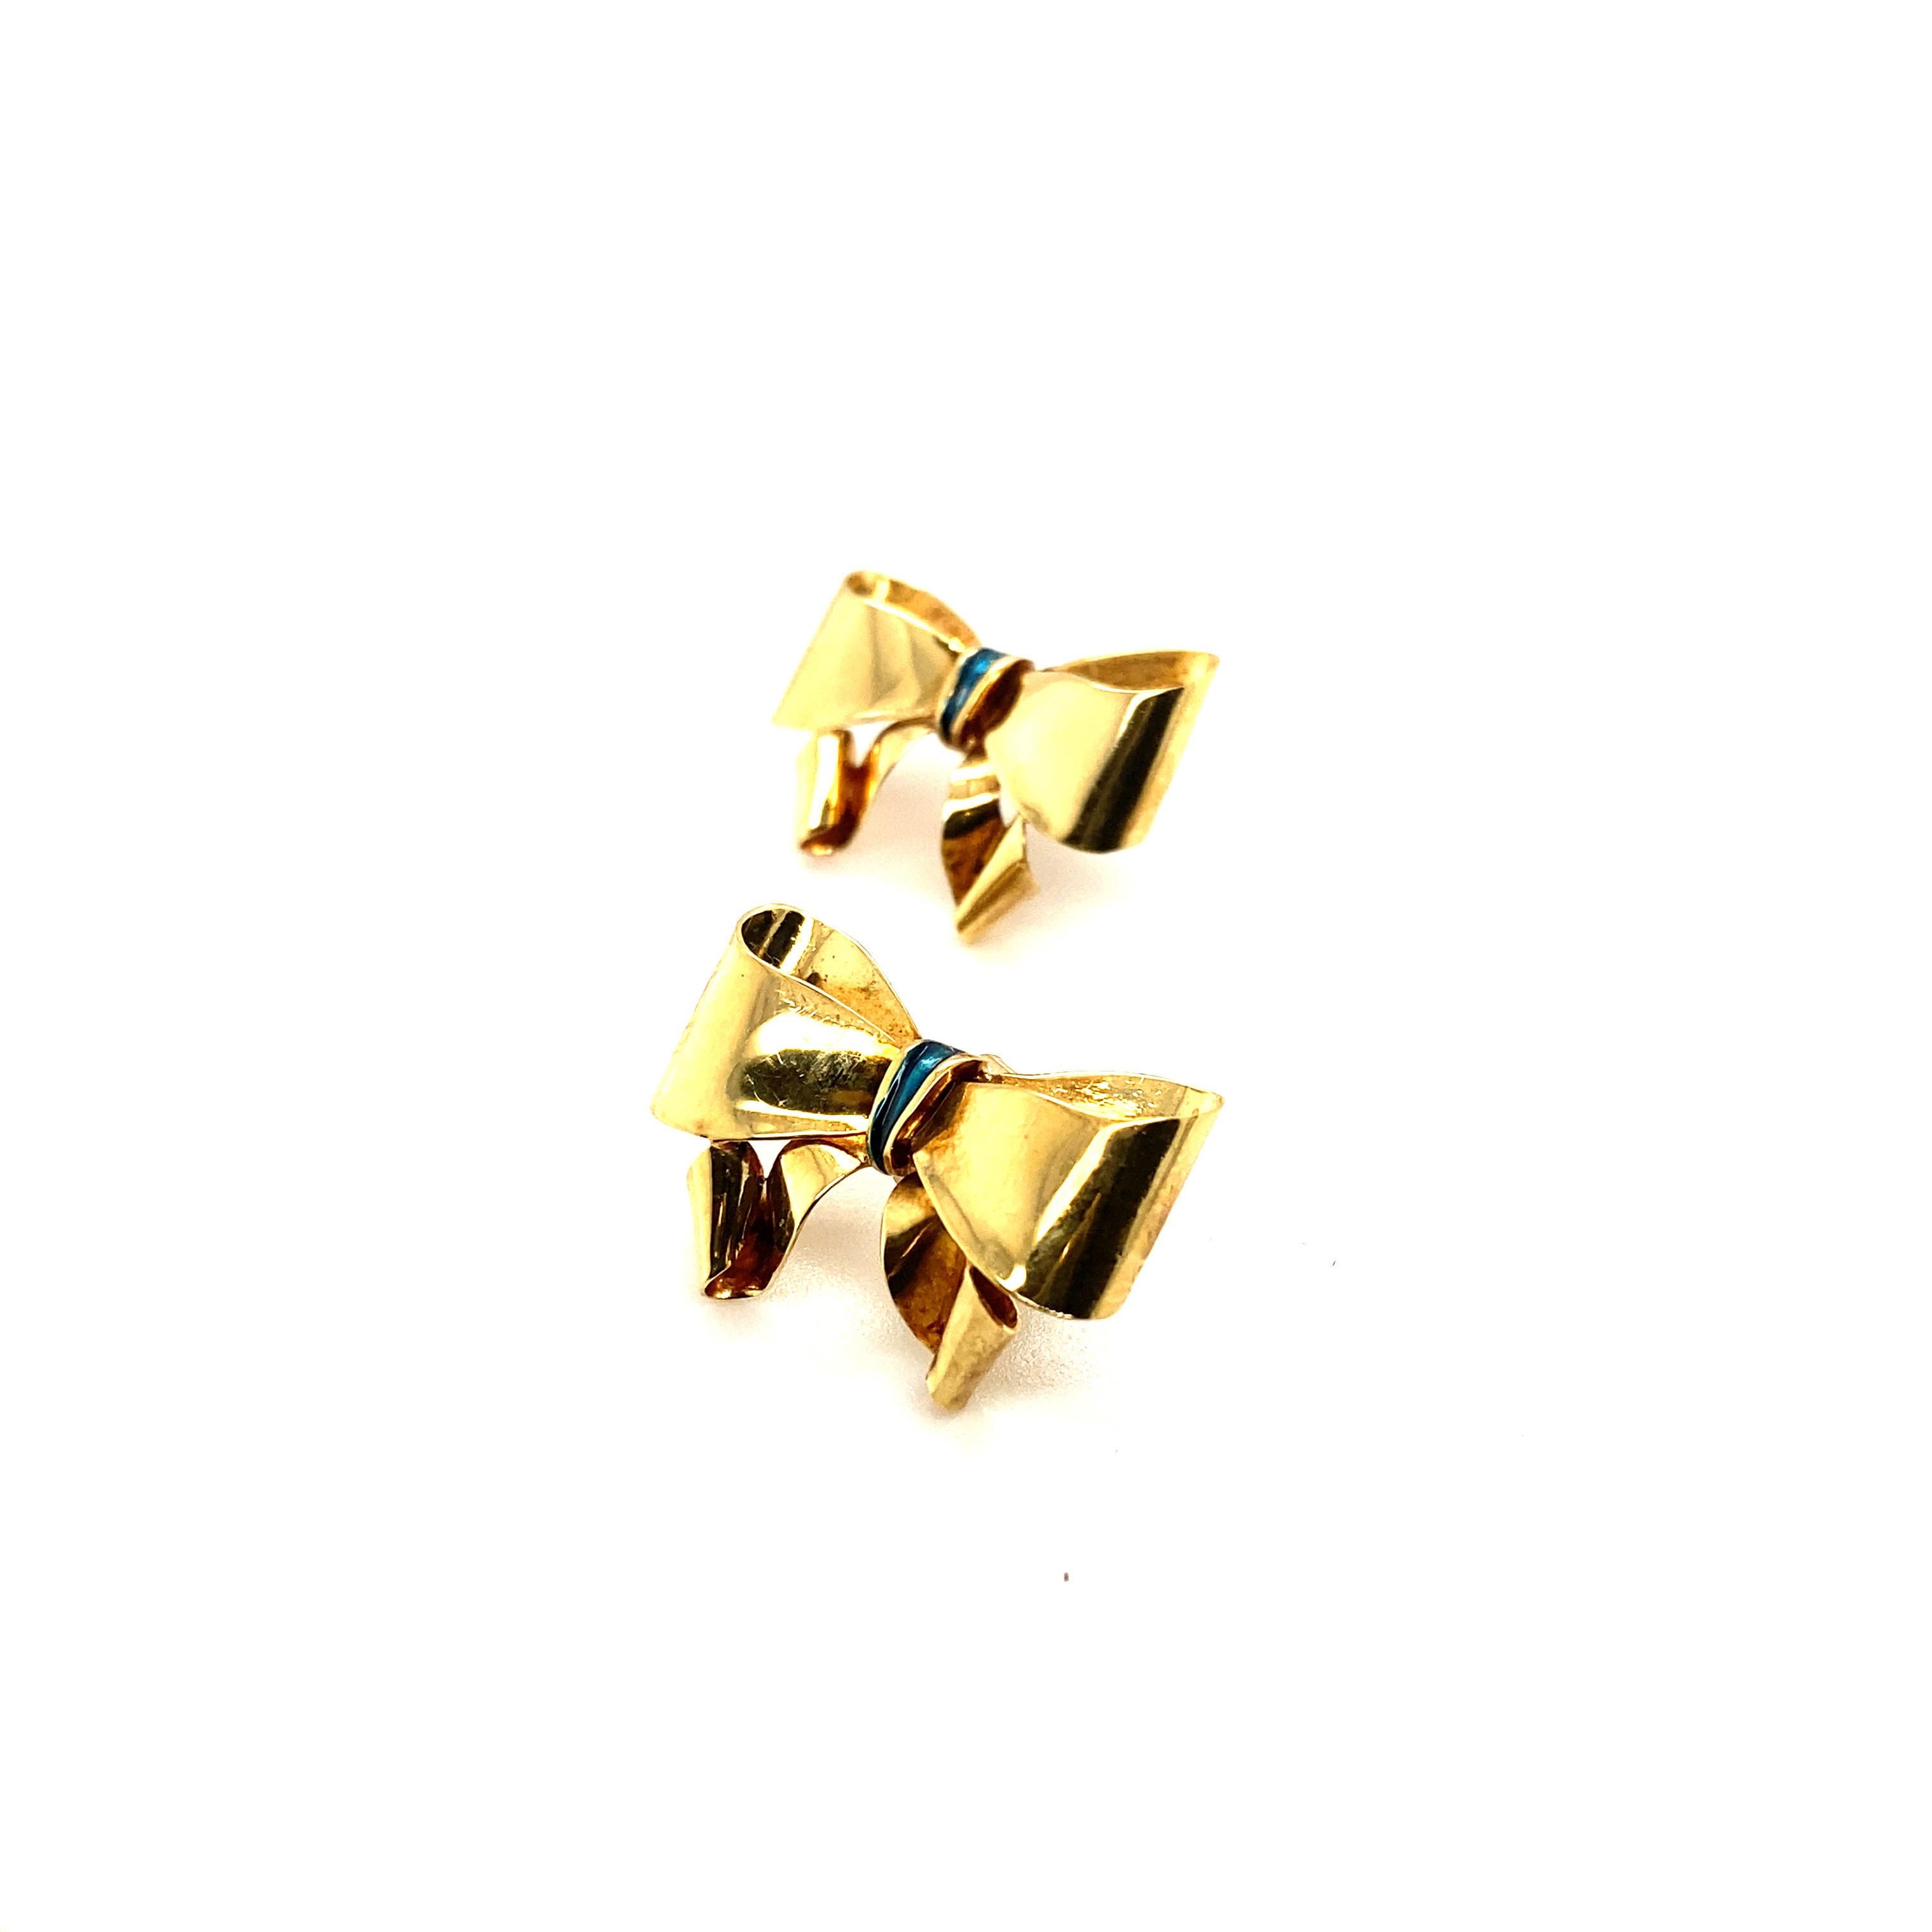 These 18 karat yellow gold earrings were designed by the world renowned Italian company La Nouvelle Bague. They are known for their exquisite craftsmanship, marrying the classic with the modern.
The earrings are crafted in a hi-polished yellow gold